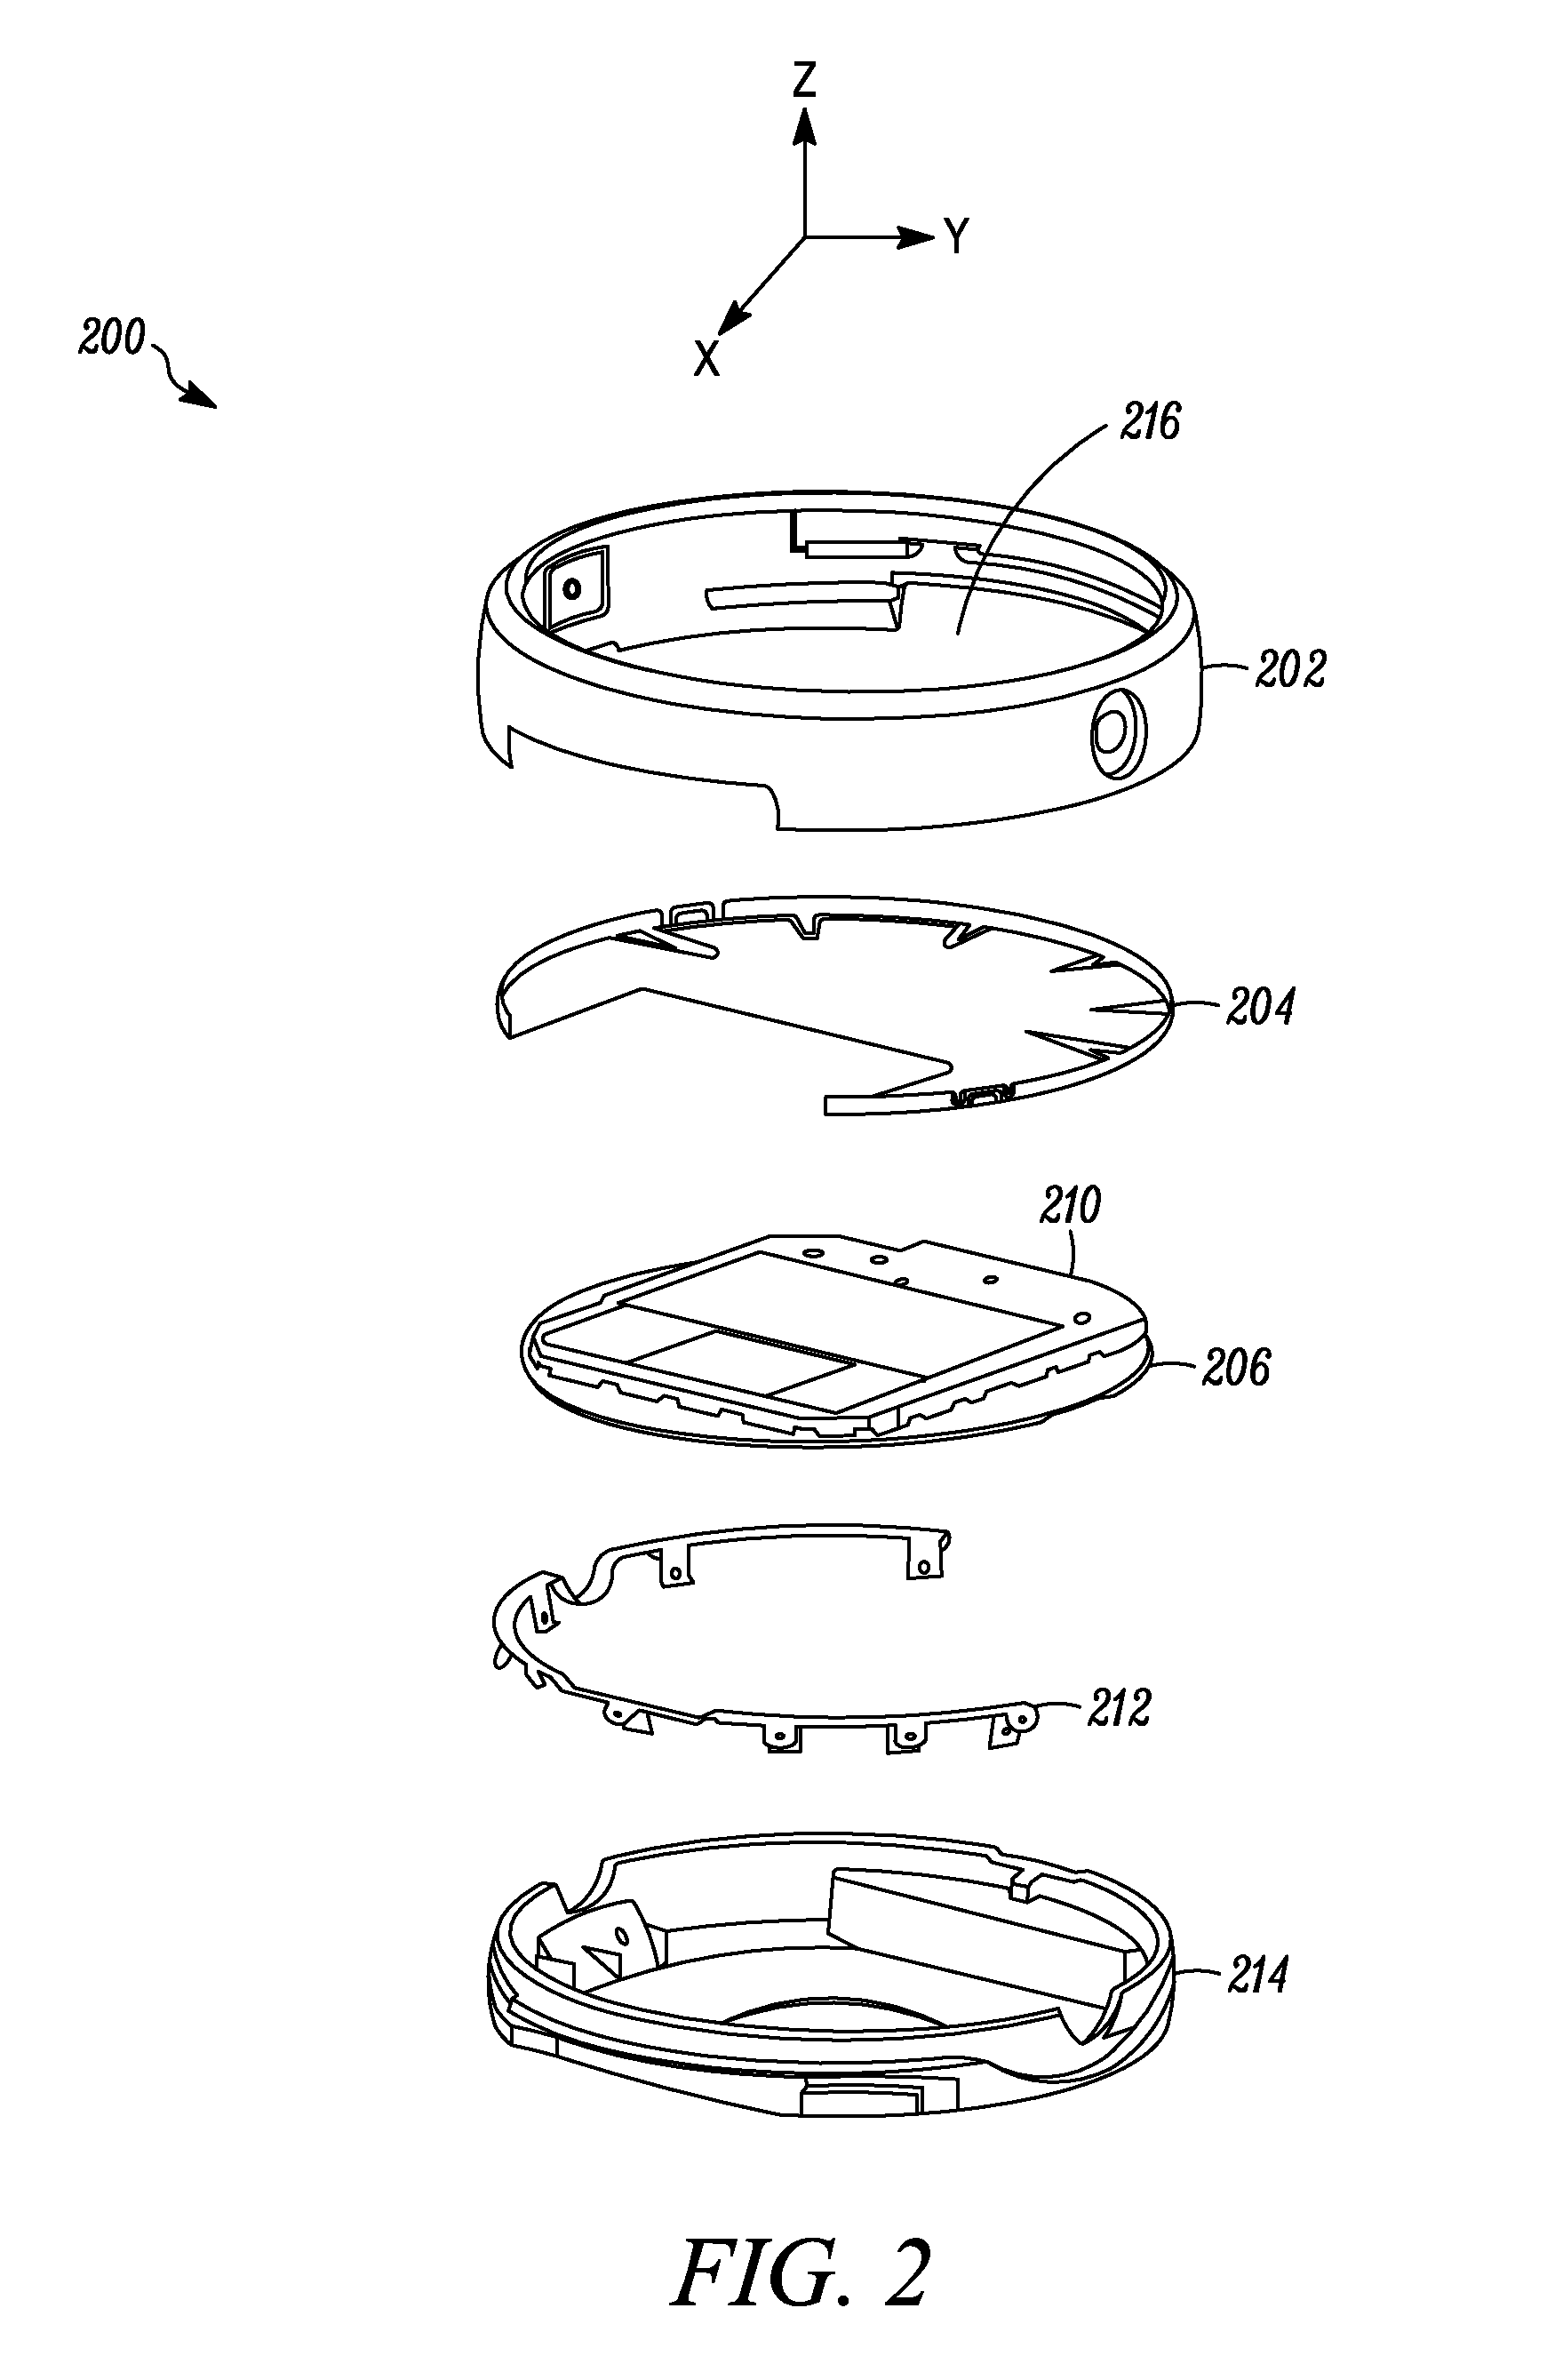 Antenna system and method of assembly for a wearable electronic device